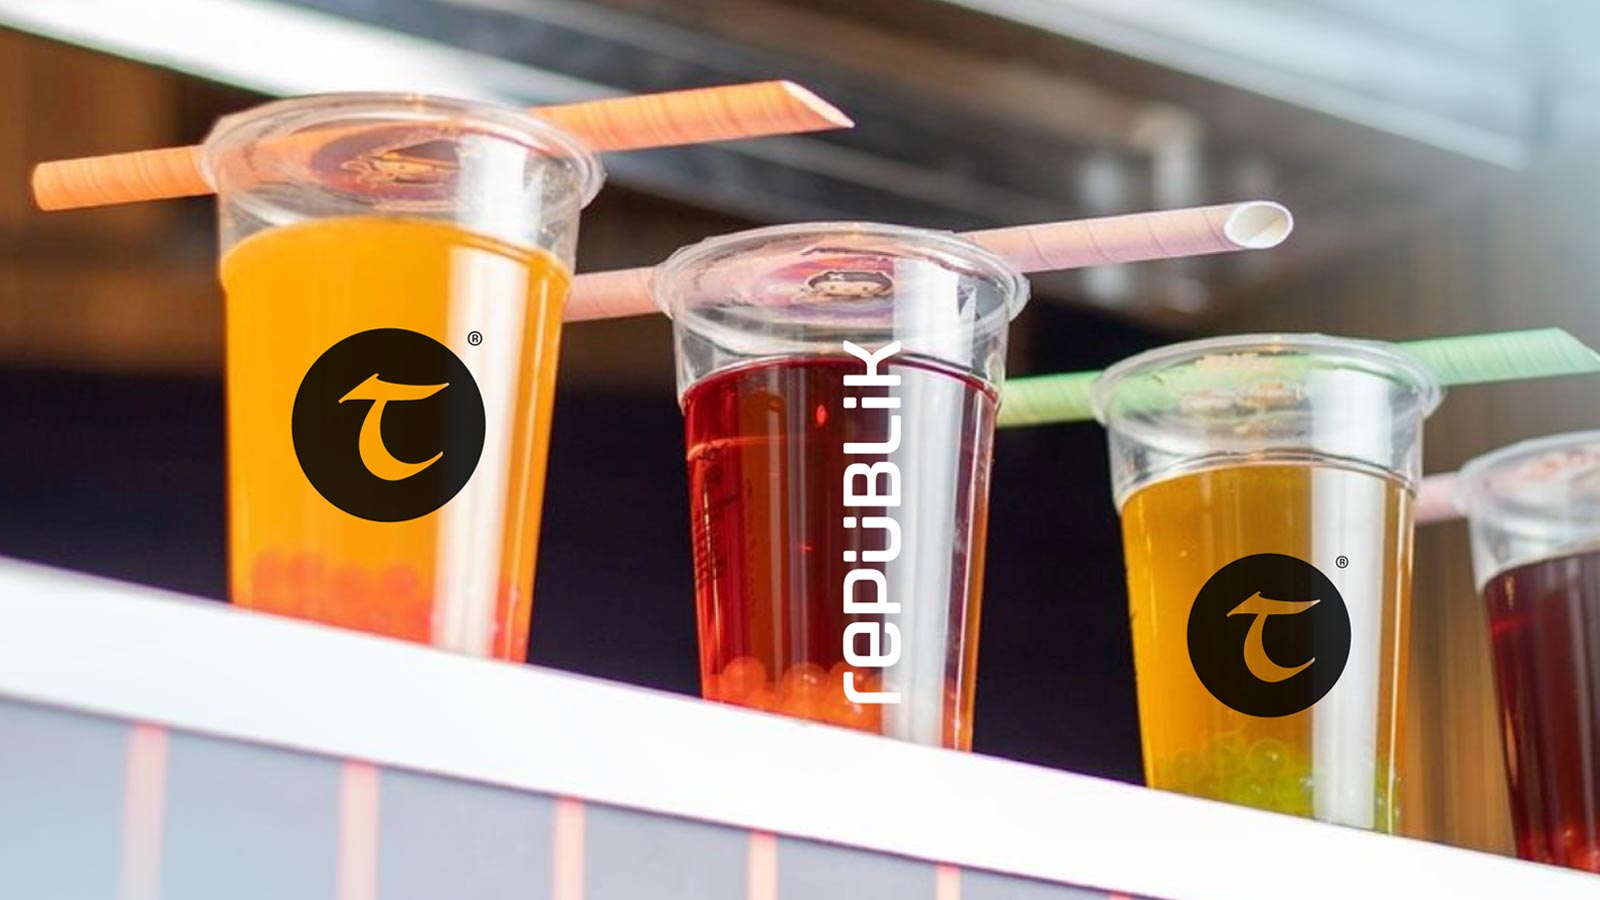 Aimstyle Launches Bubble Tea Brand in Turkey